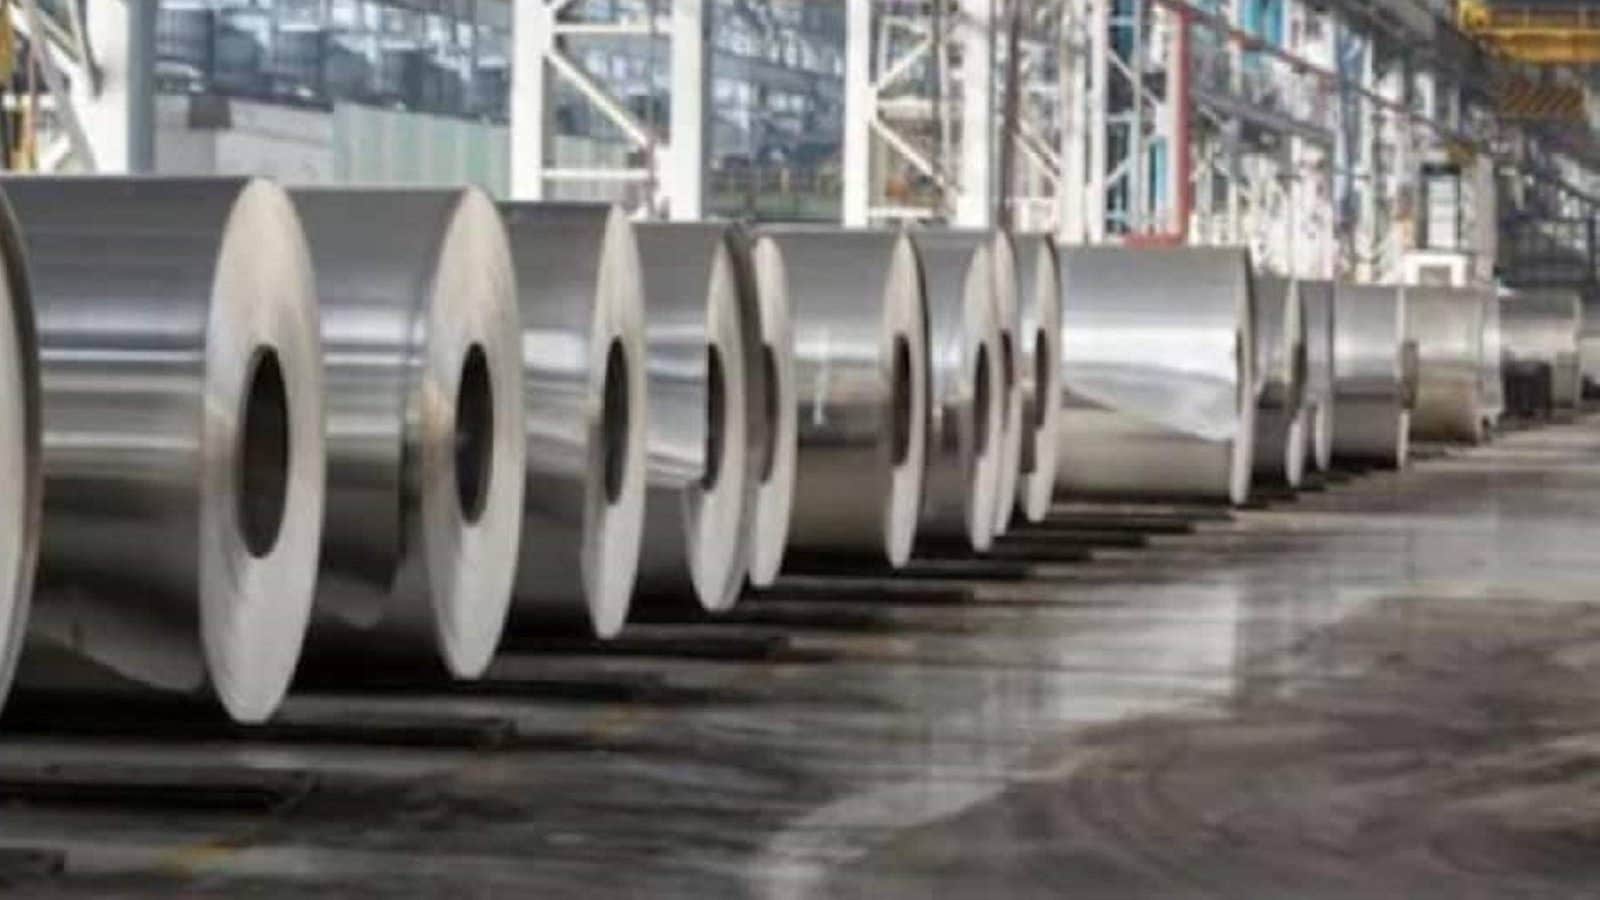 Jindal Stainless Shares Surge After Company Fixes Record Date for Merger With JSL; Details